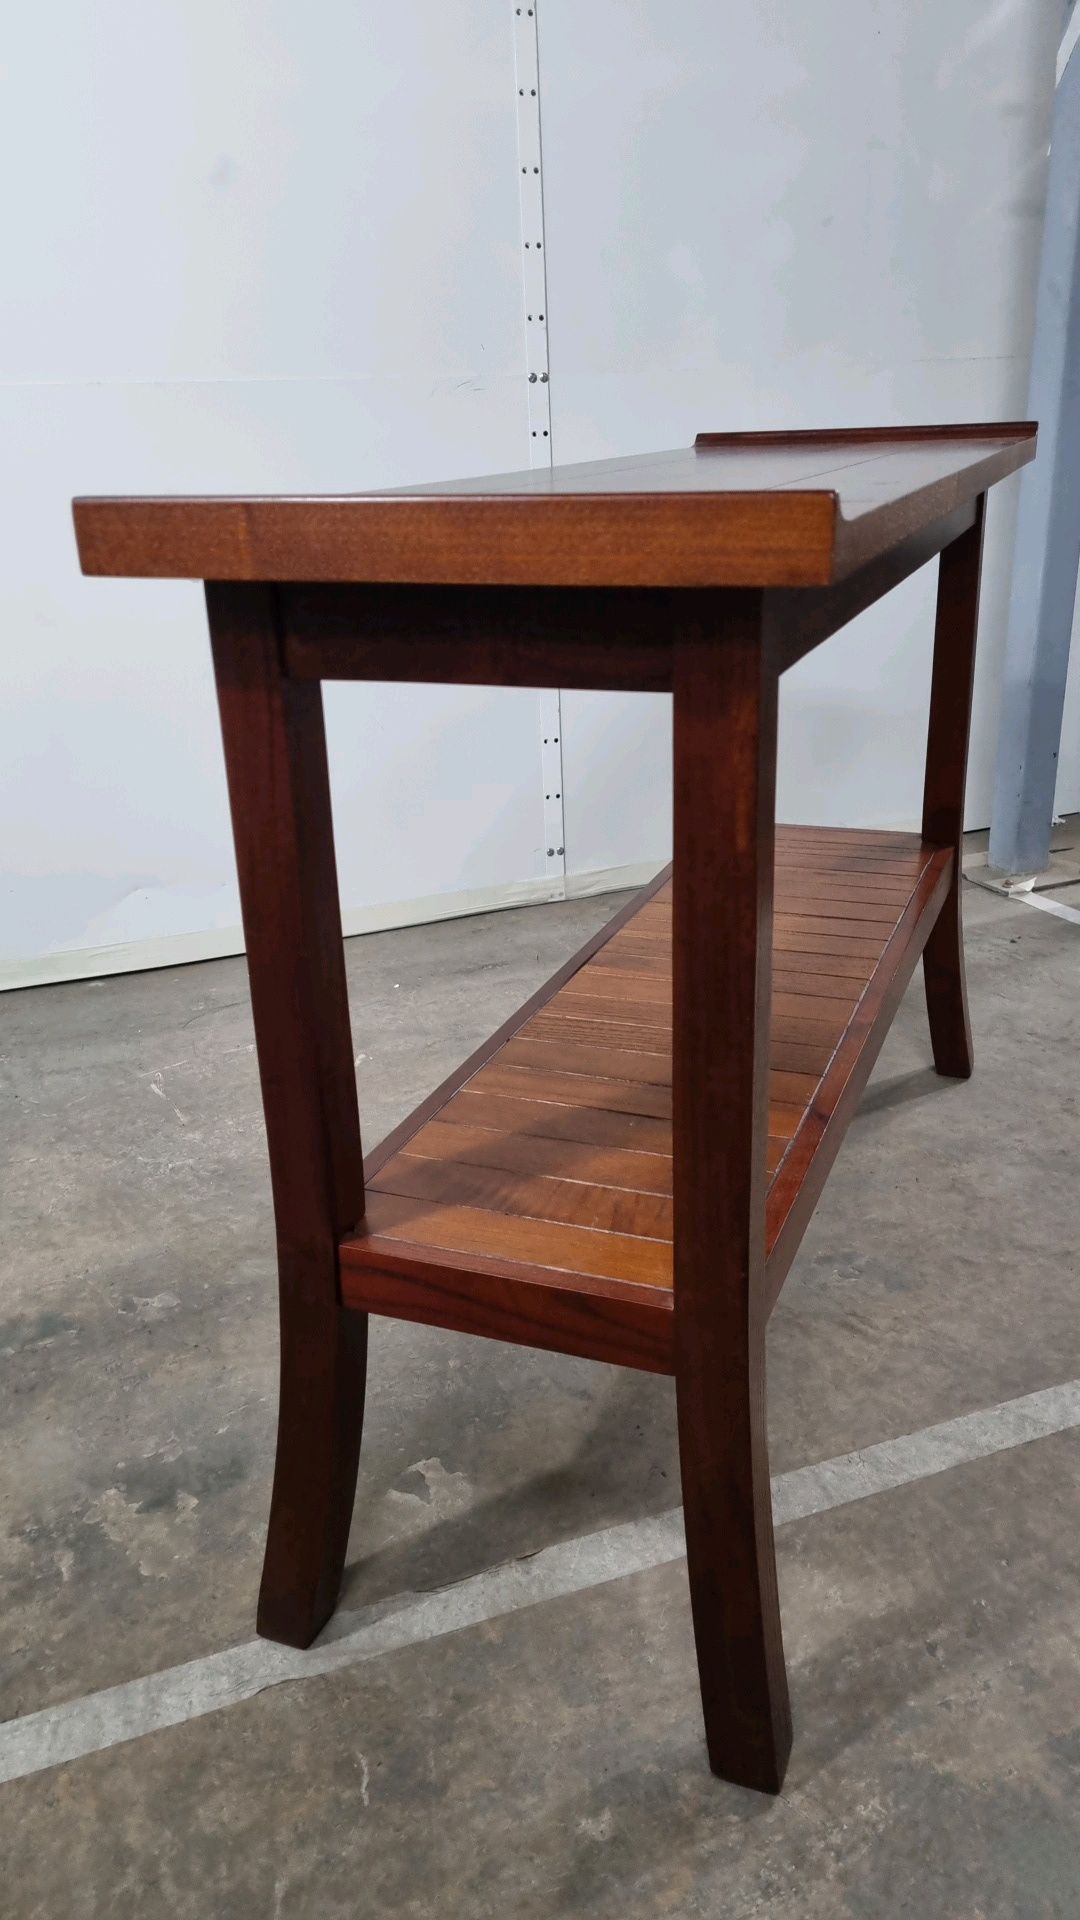 Mahogany Side Table With Shelf 1200mm x 790mm x 400mm - Image 5 of 5